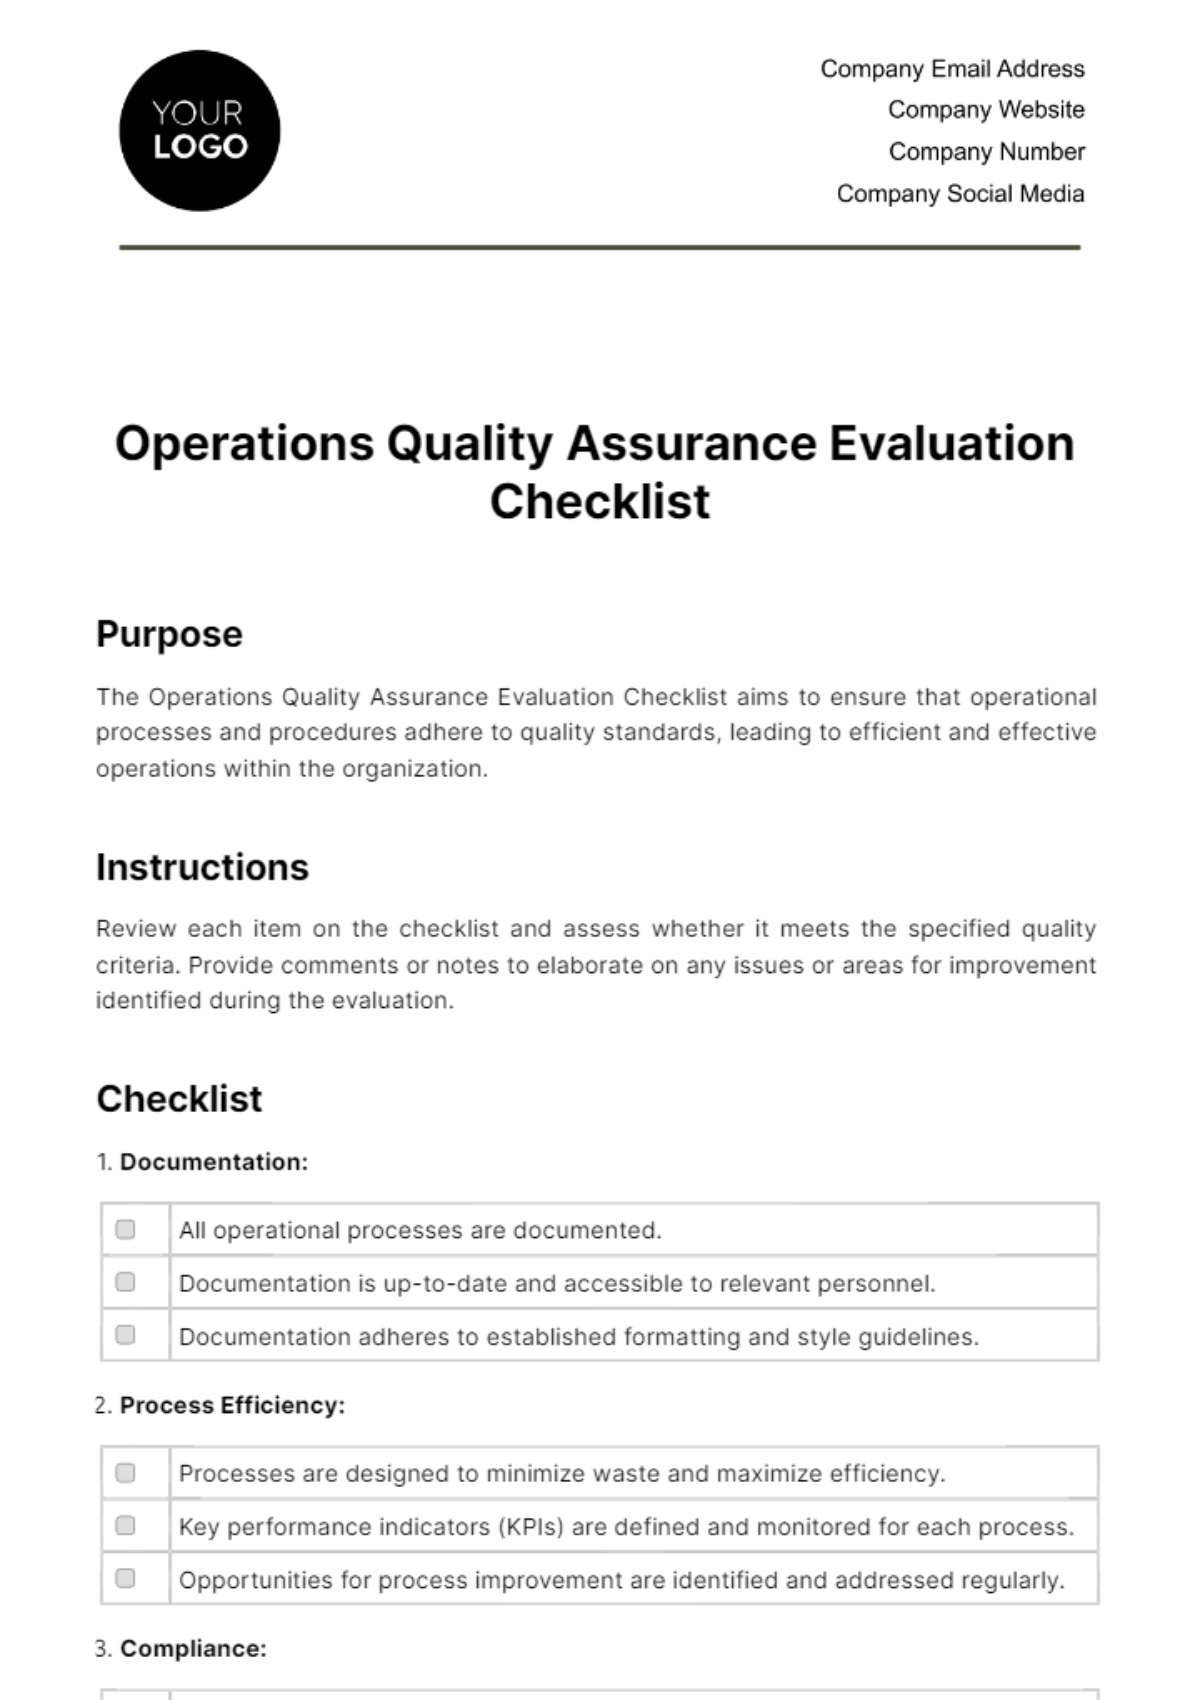 Operations Quality Assurance Evaluation Checklist Template